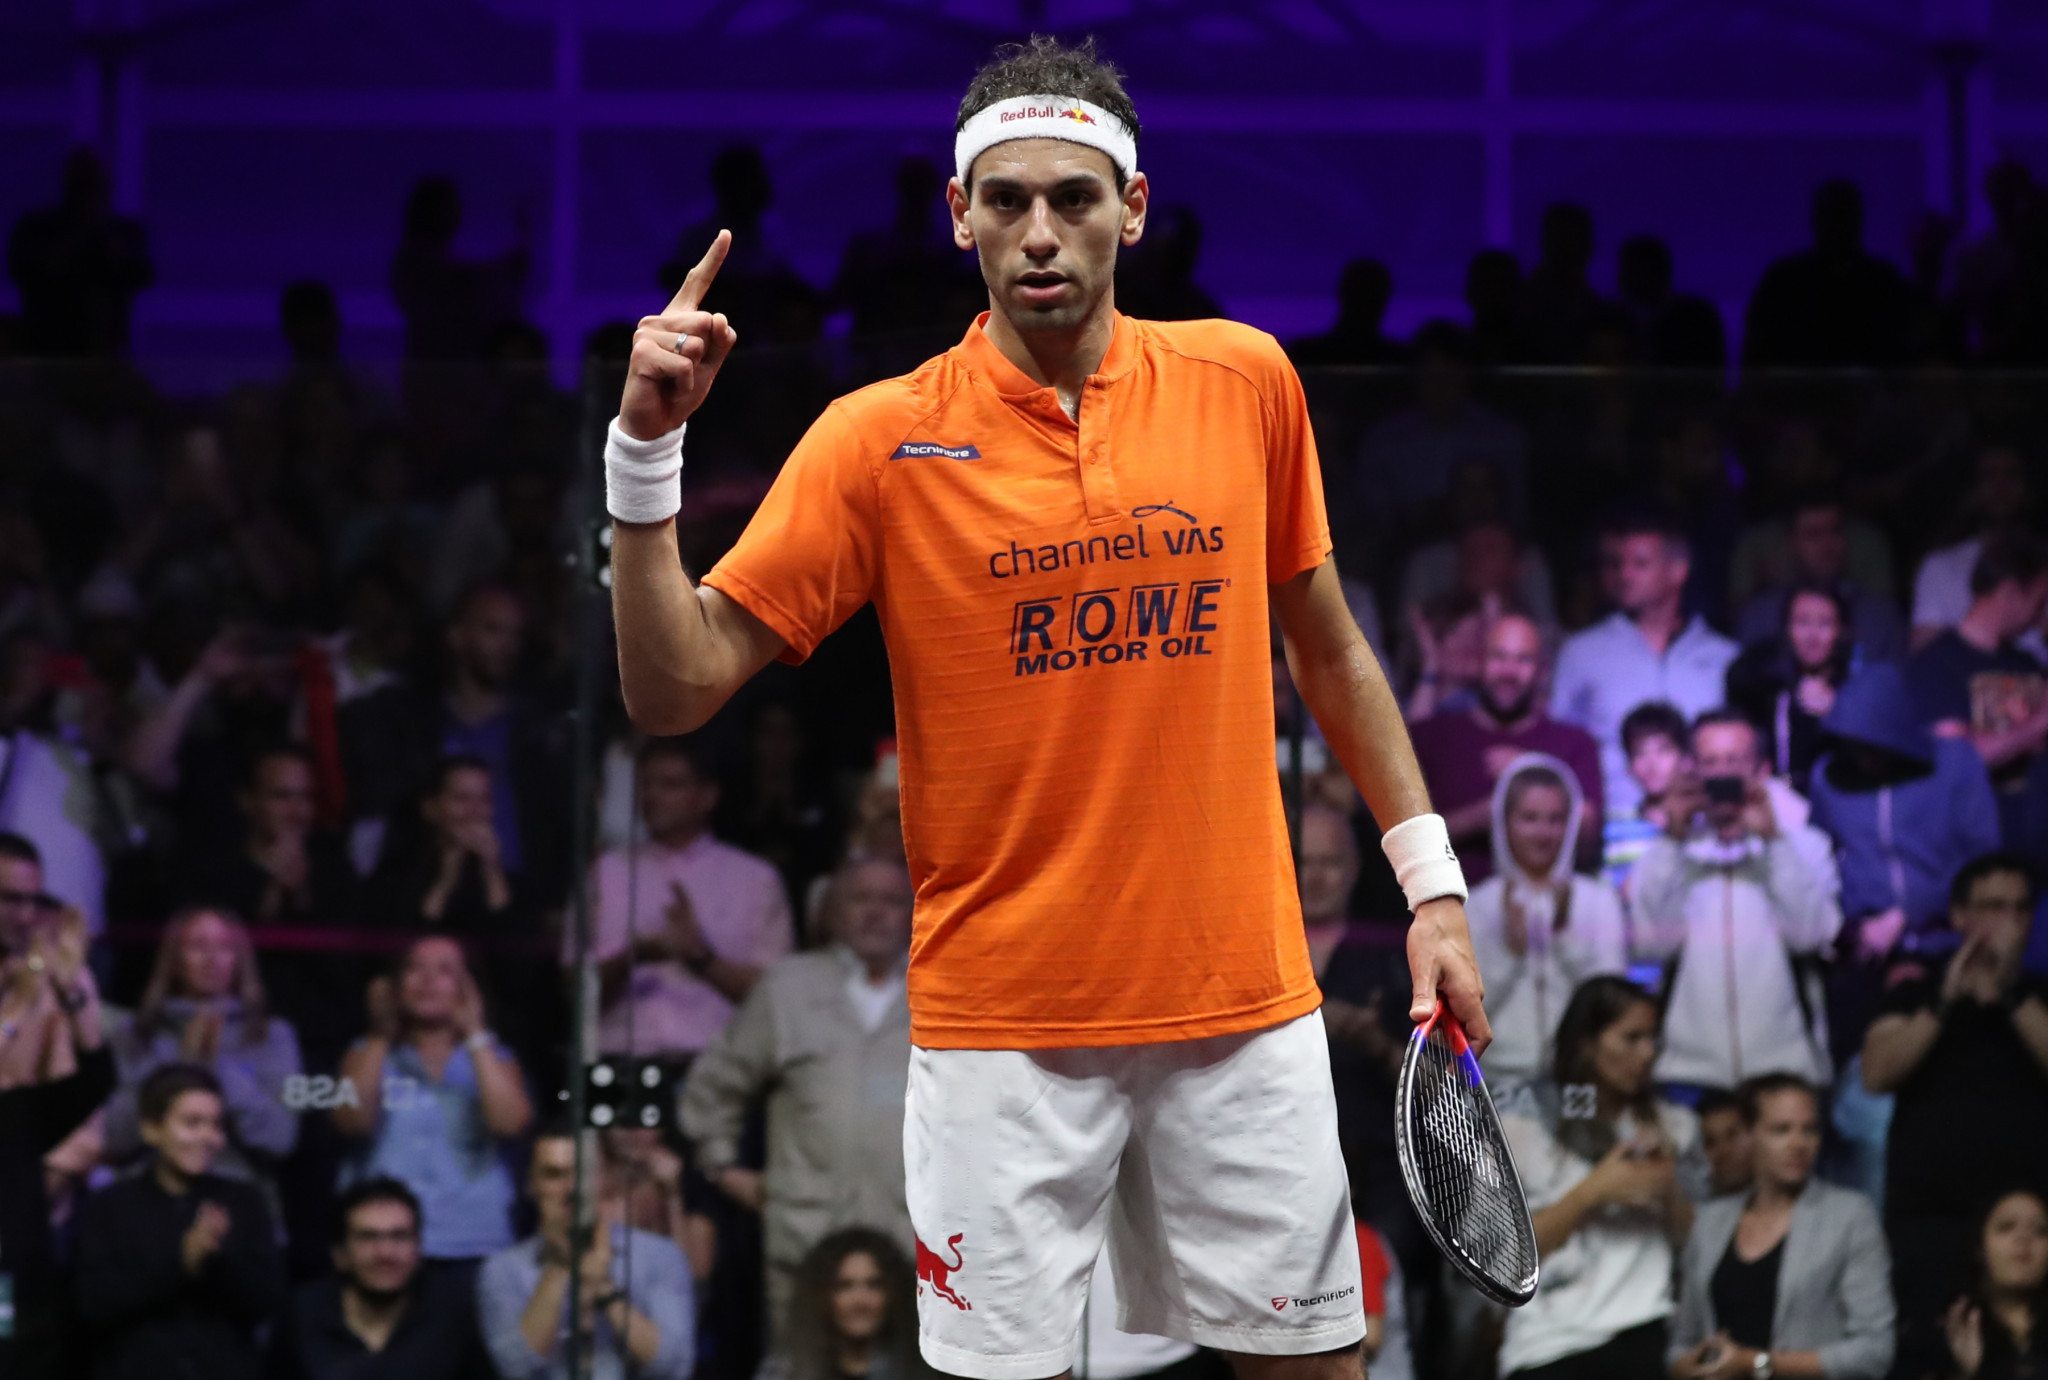 Mohamed Elshorbagy through to Grasshopper Cup semi-finals but top seed dumped out